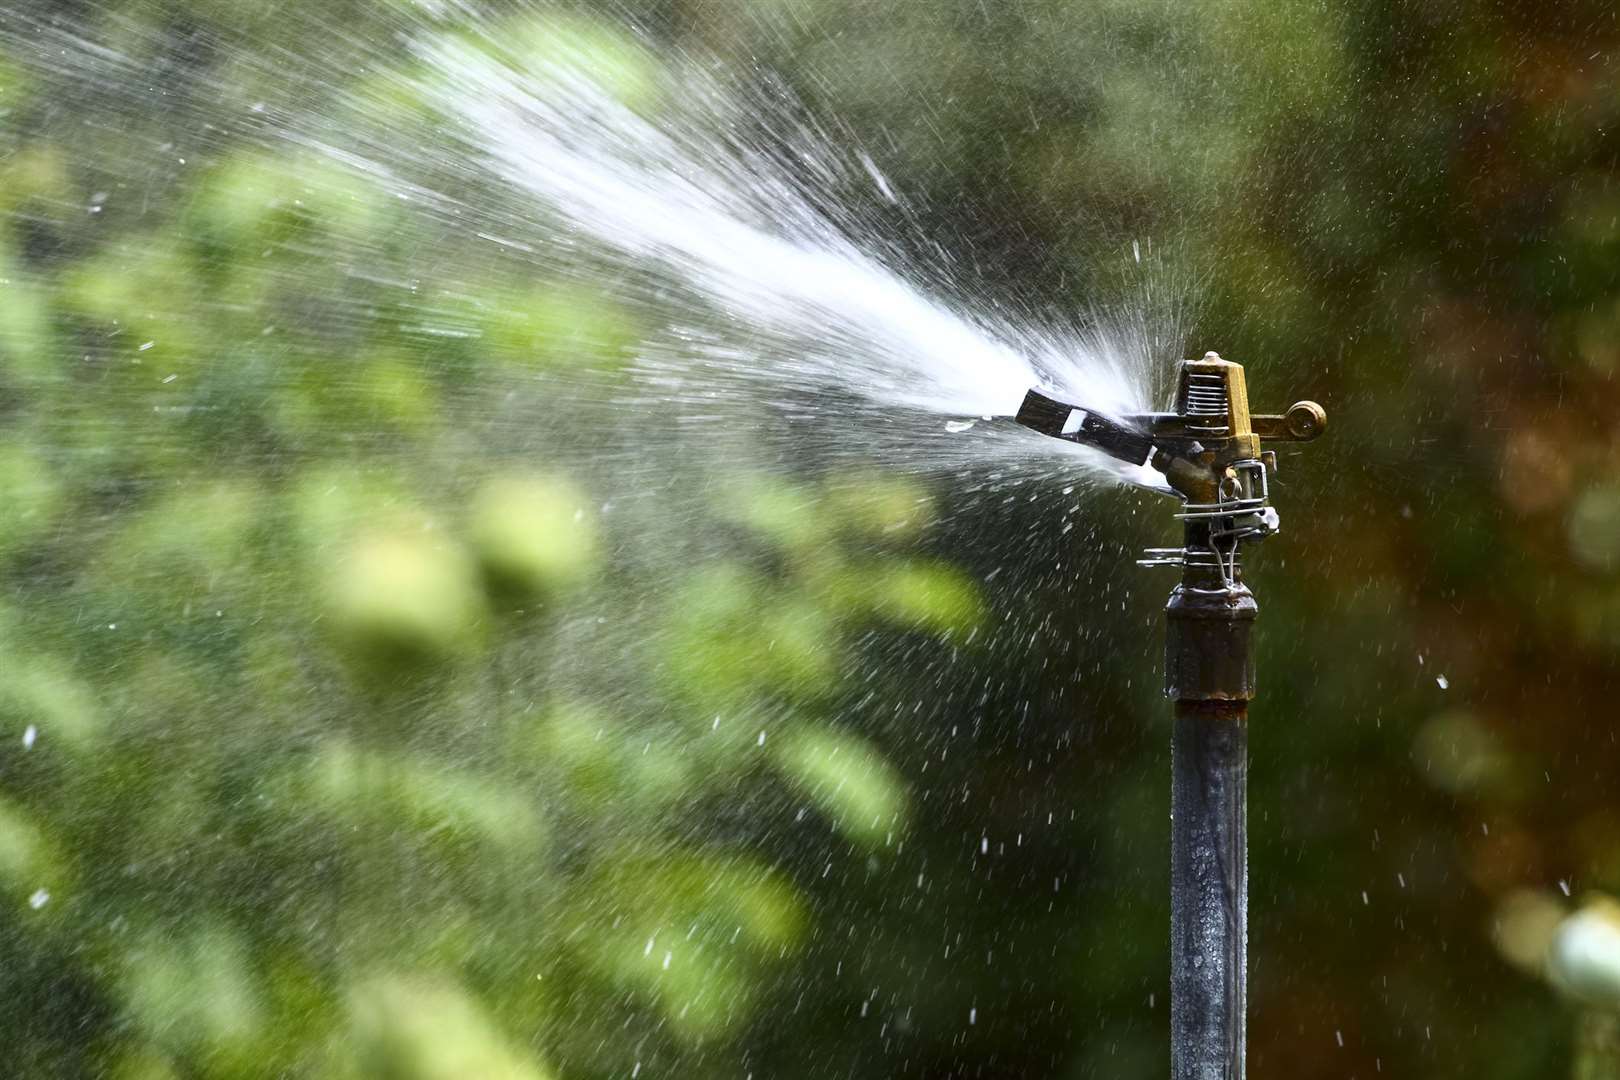 Hosepipe restrictions eased in November 2022 after heavy rain. Image: iStock.